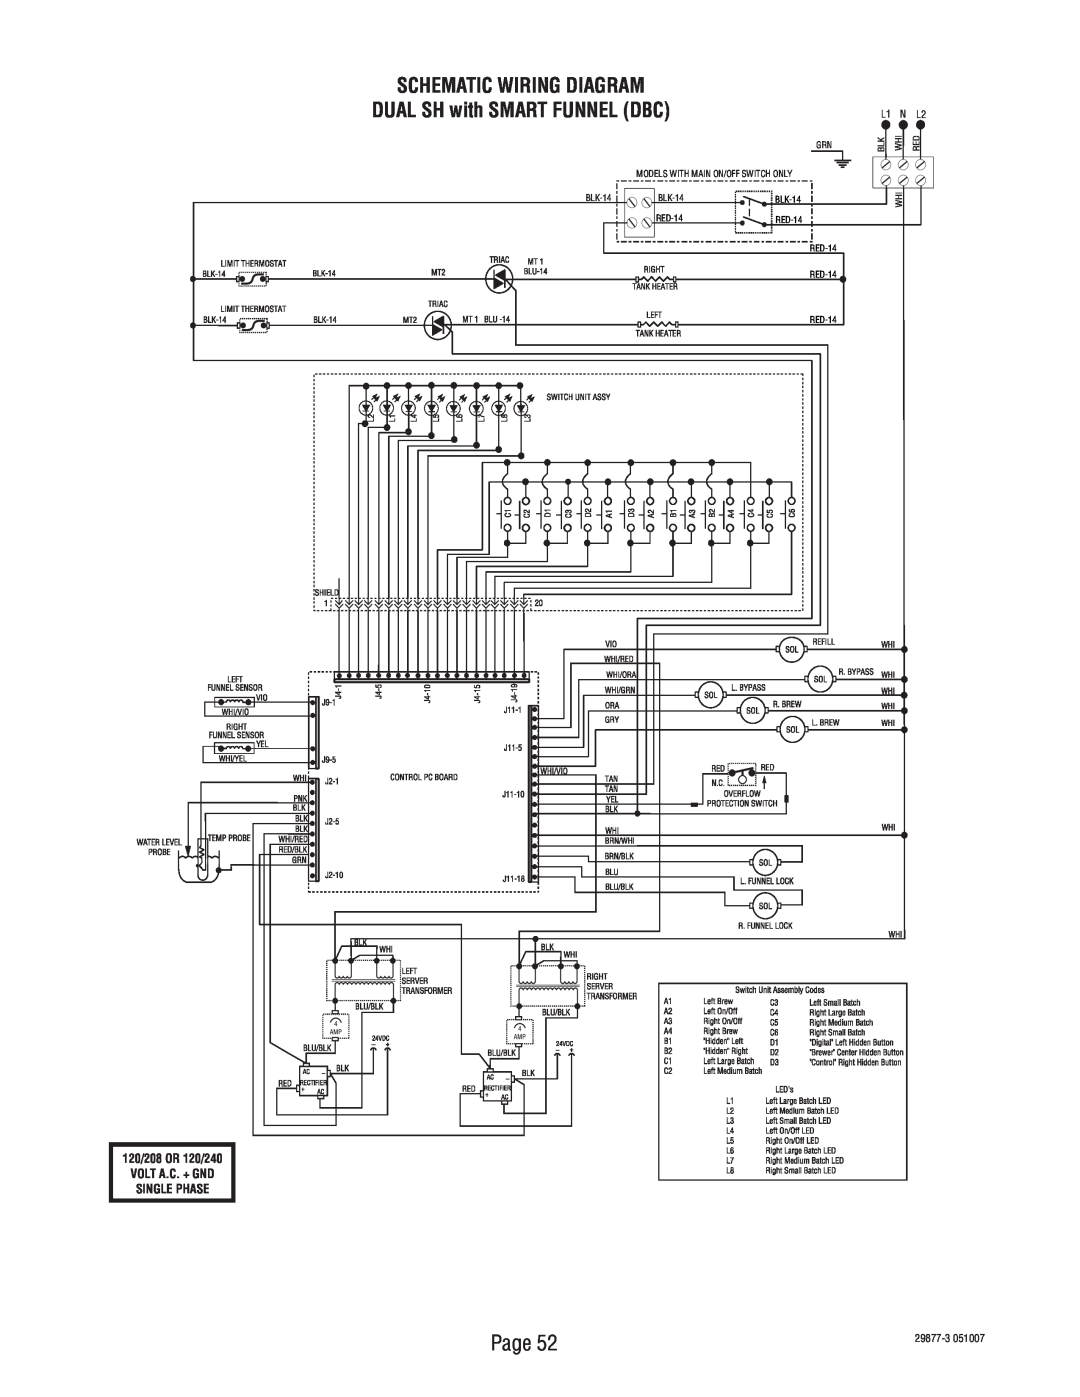 Bunn S/N DUAL068000 manual SCHEMATIC WIRING DIAGRAM DUAL SH with SMART FUNNEL DBC, Volt A.C. + Gnd Single Phase, 29877-3 